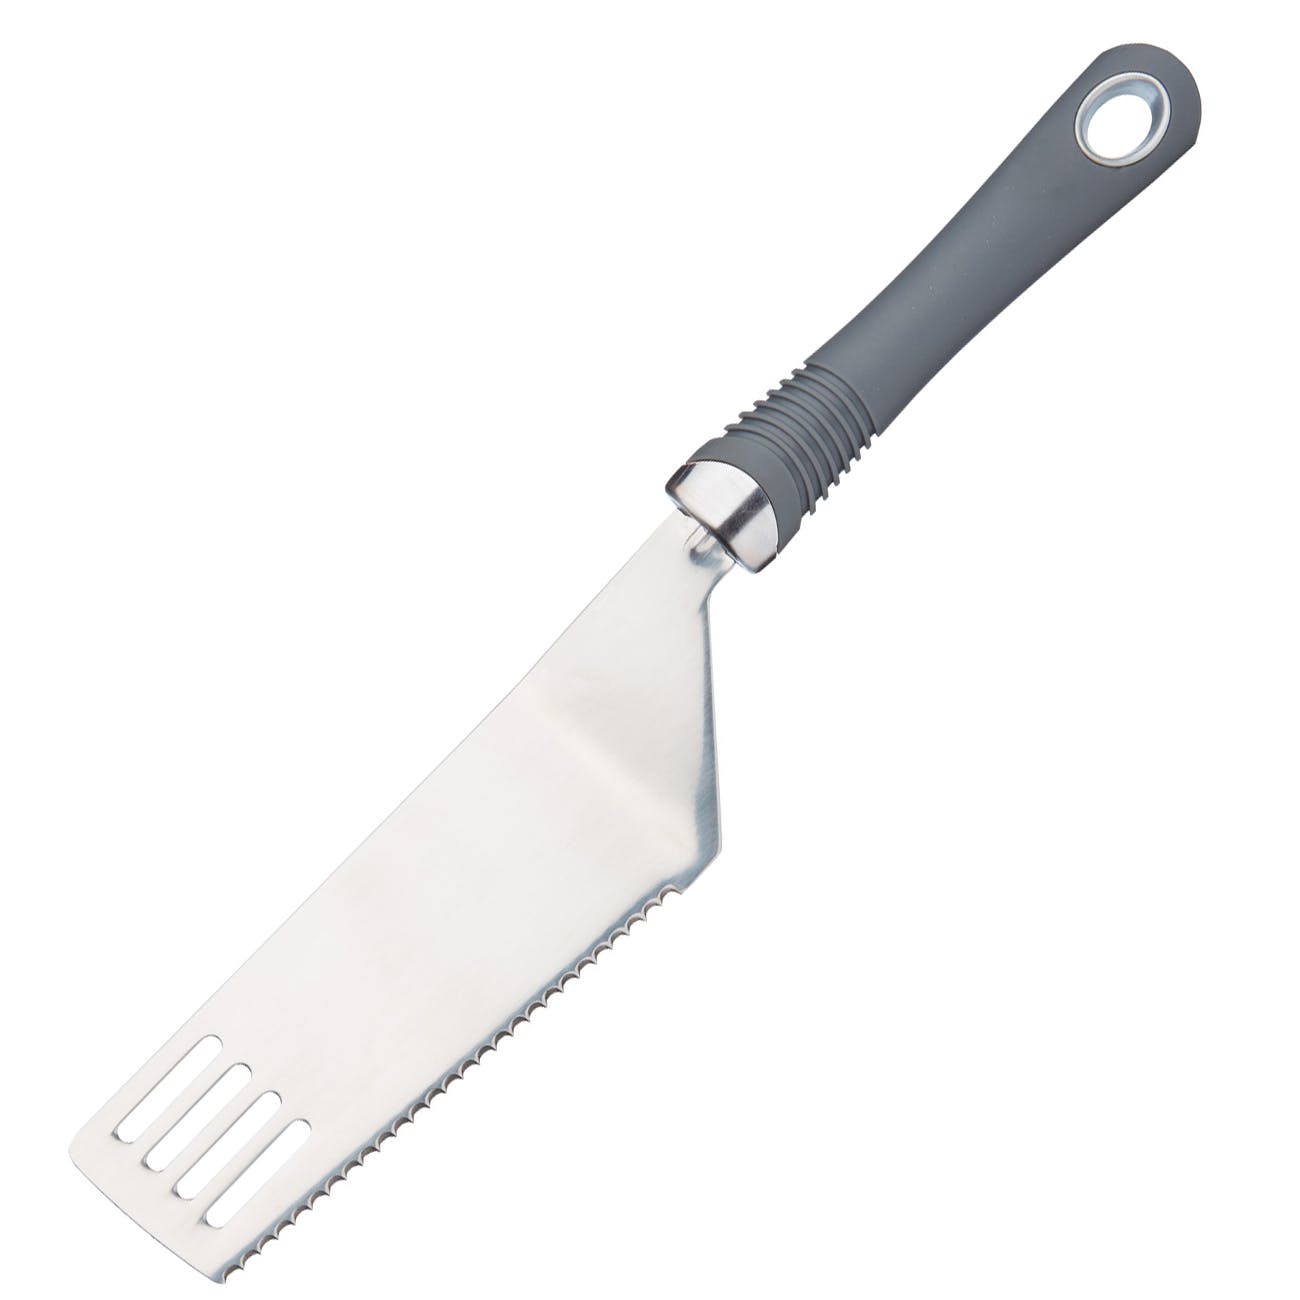 KitchenCraft Professional Lasagne Cutter / Server with Soft Grip Handle - The Cooks Cupboard Ltd